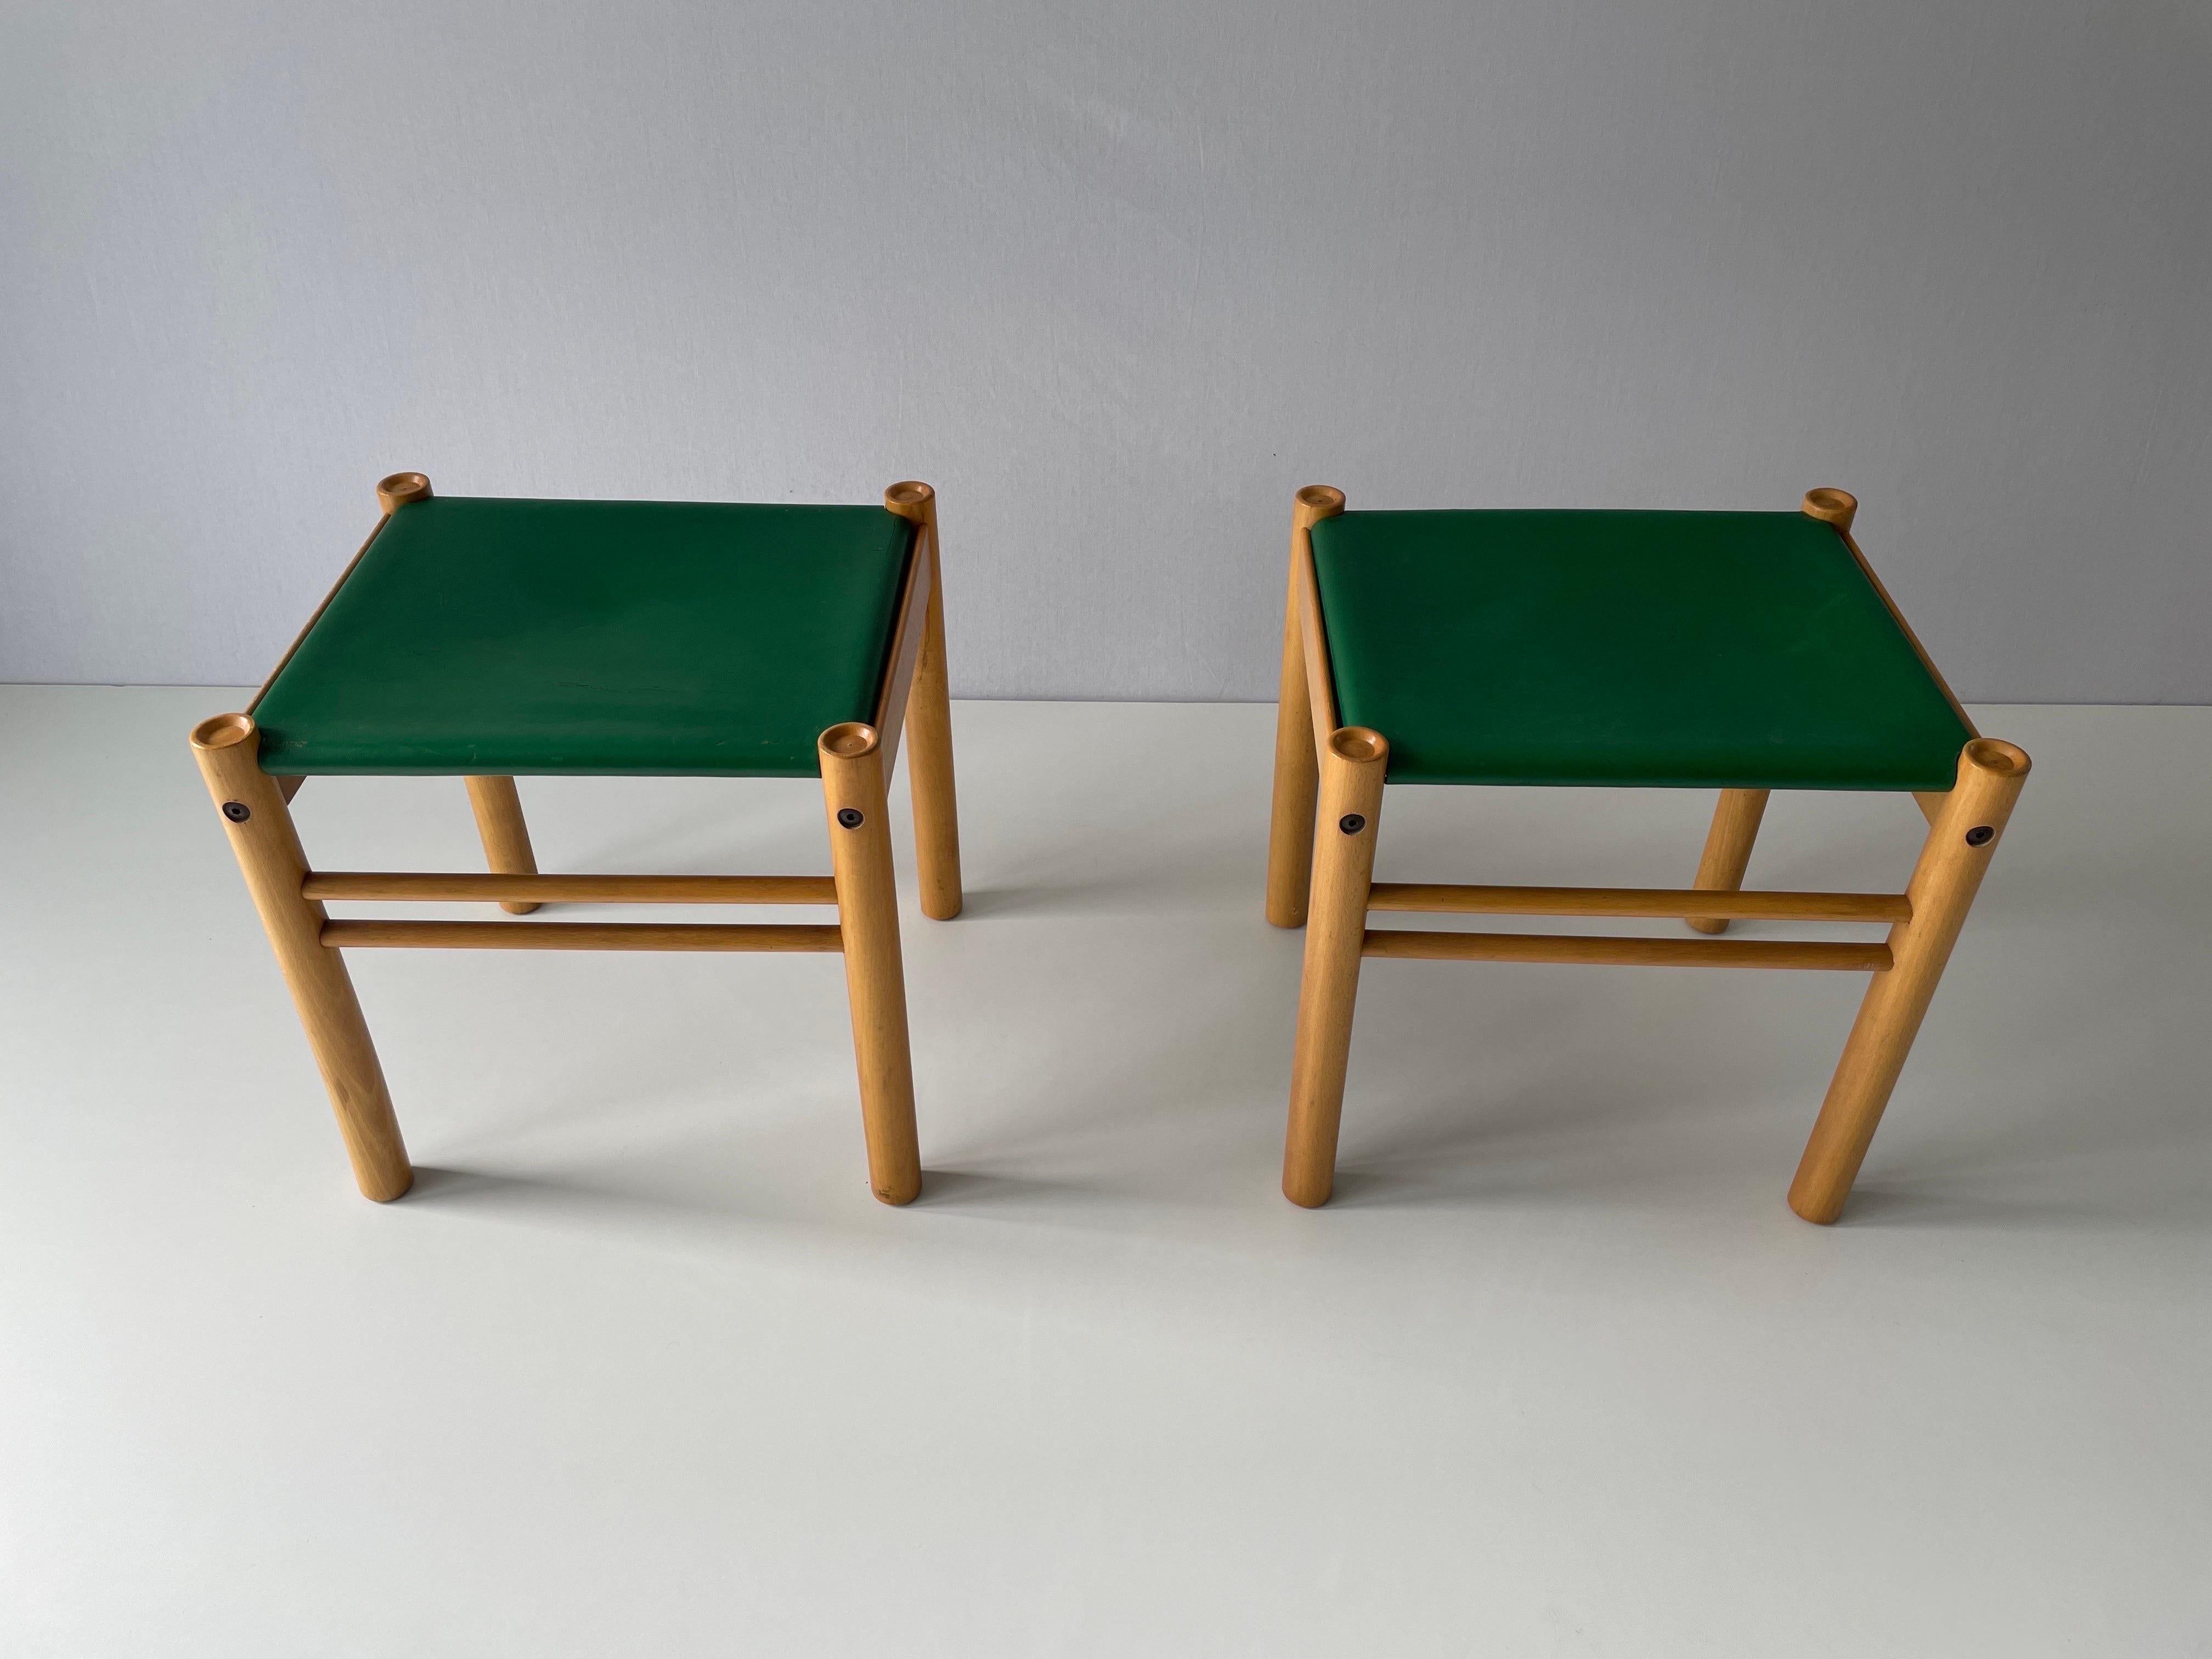 Green Leather and Birch Wood Pair of Stools by IBISCO, 1970s, Italy

Measurtements :

Seat : 45 cm X 38 cm
Height : 45 cm

Please do not hesitate to ask us if you have any questions.